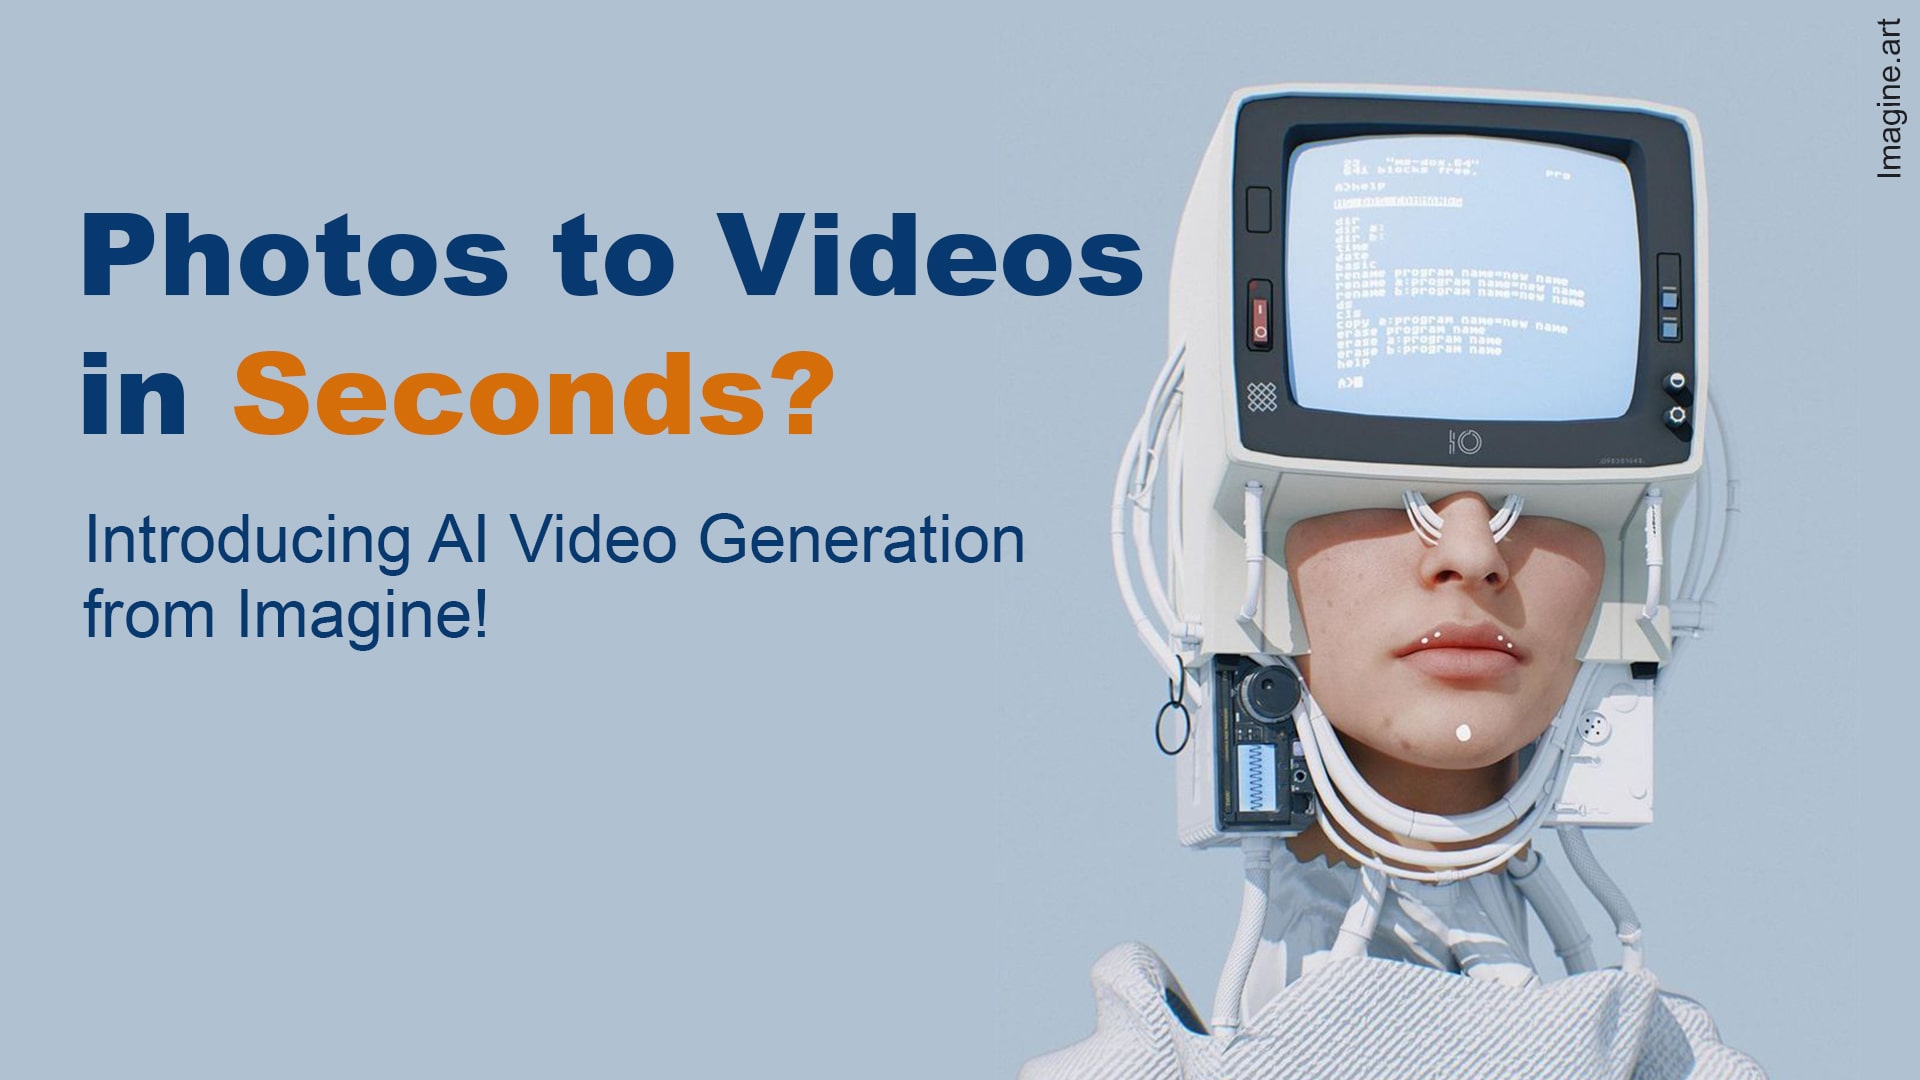 Photos to Videos in Seconds? Introducing AI Video Generation from Imagine!